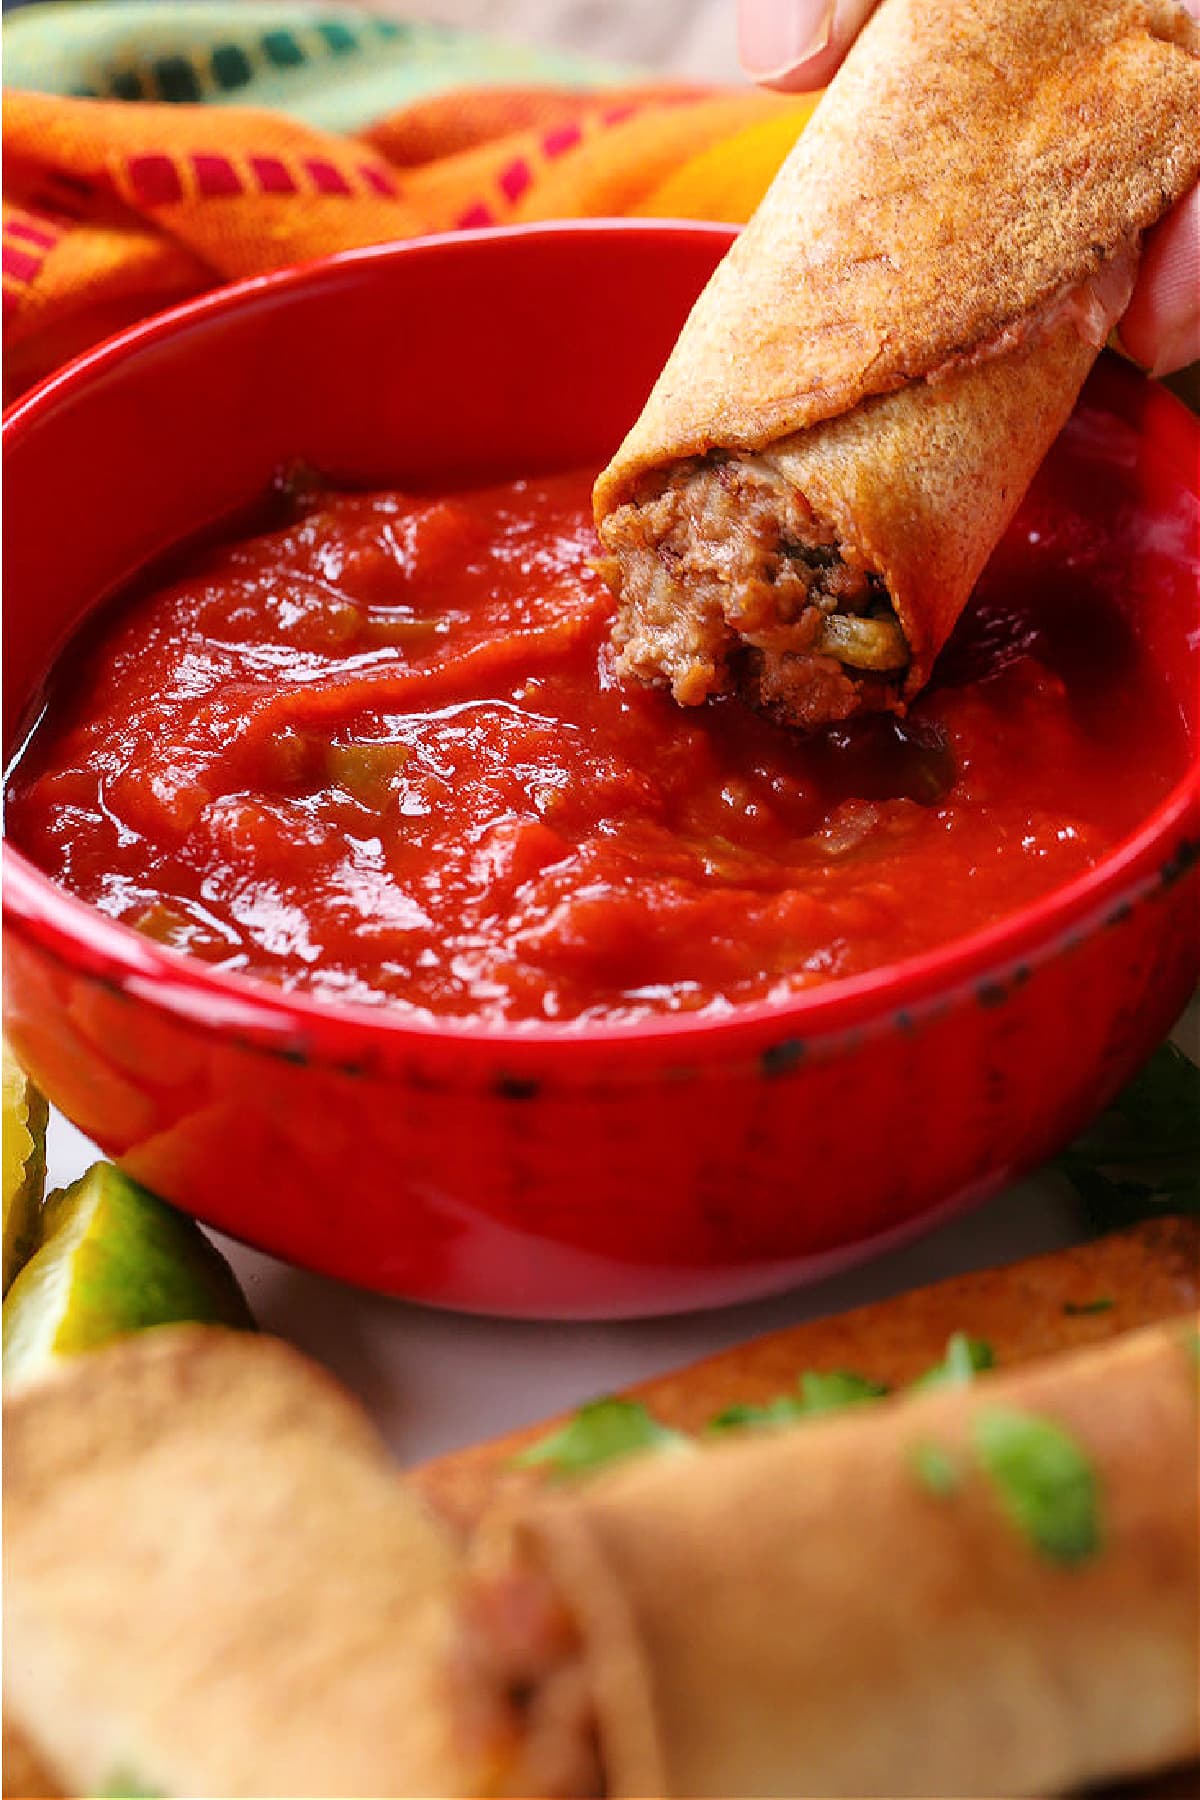 beef taquito dipping into salsa